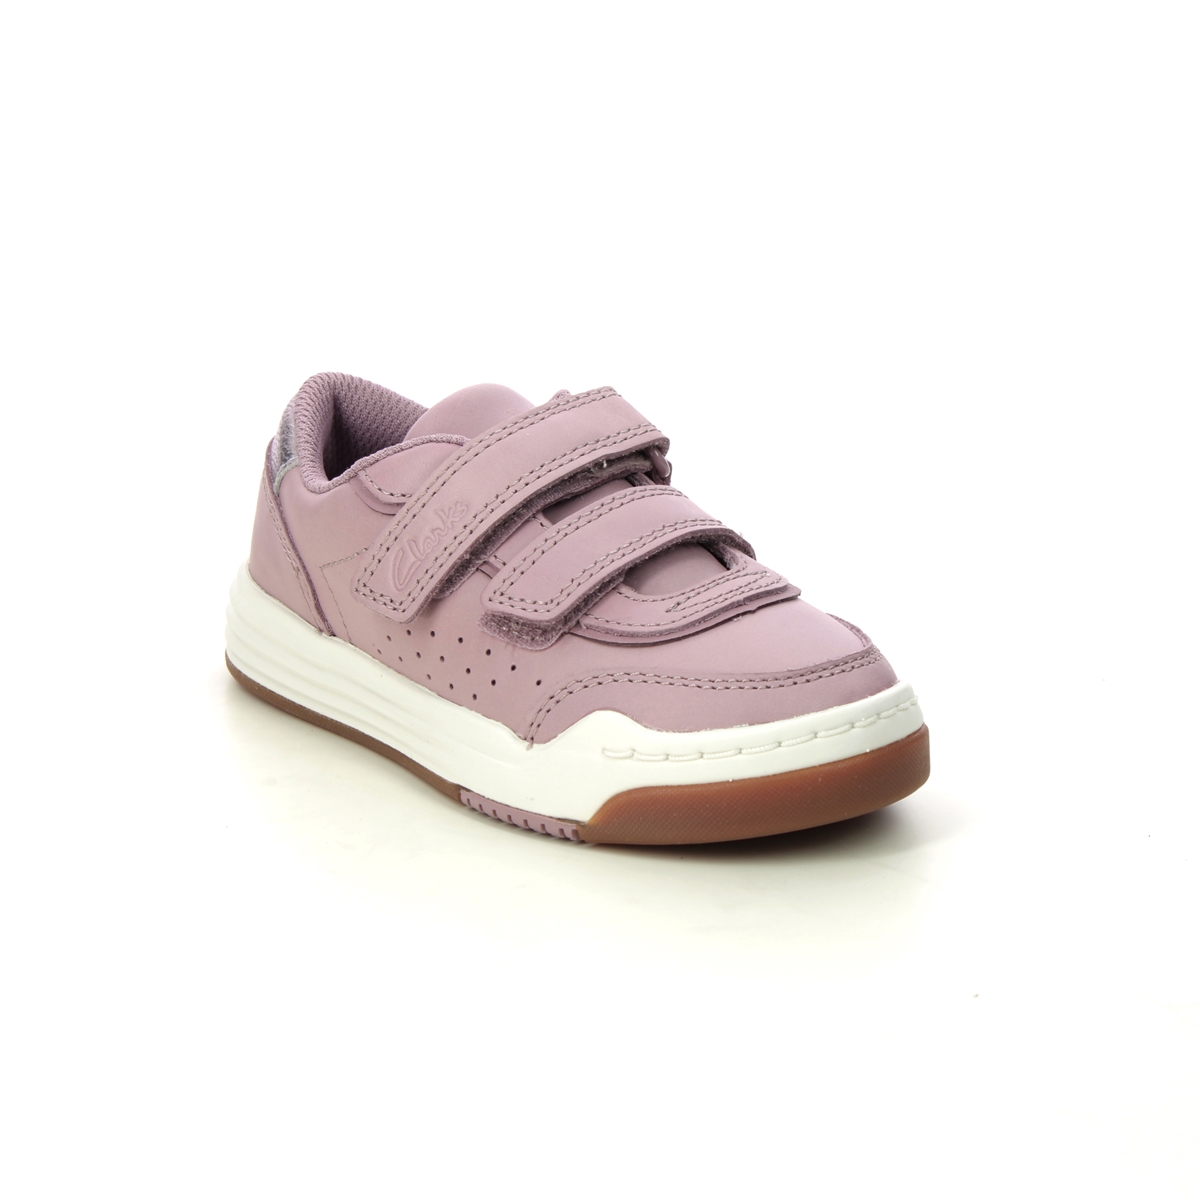 Clarks Urban Solo K Pink Leather Kids first shoes 7666-16F in a Plain Leather in Size 8.5